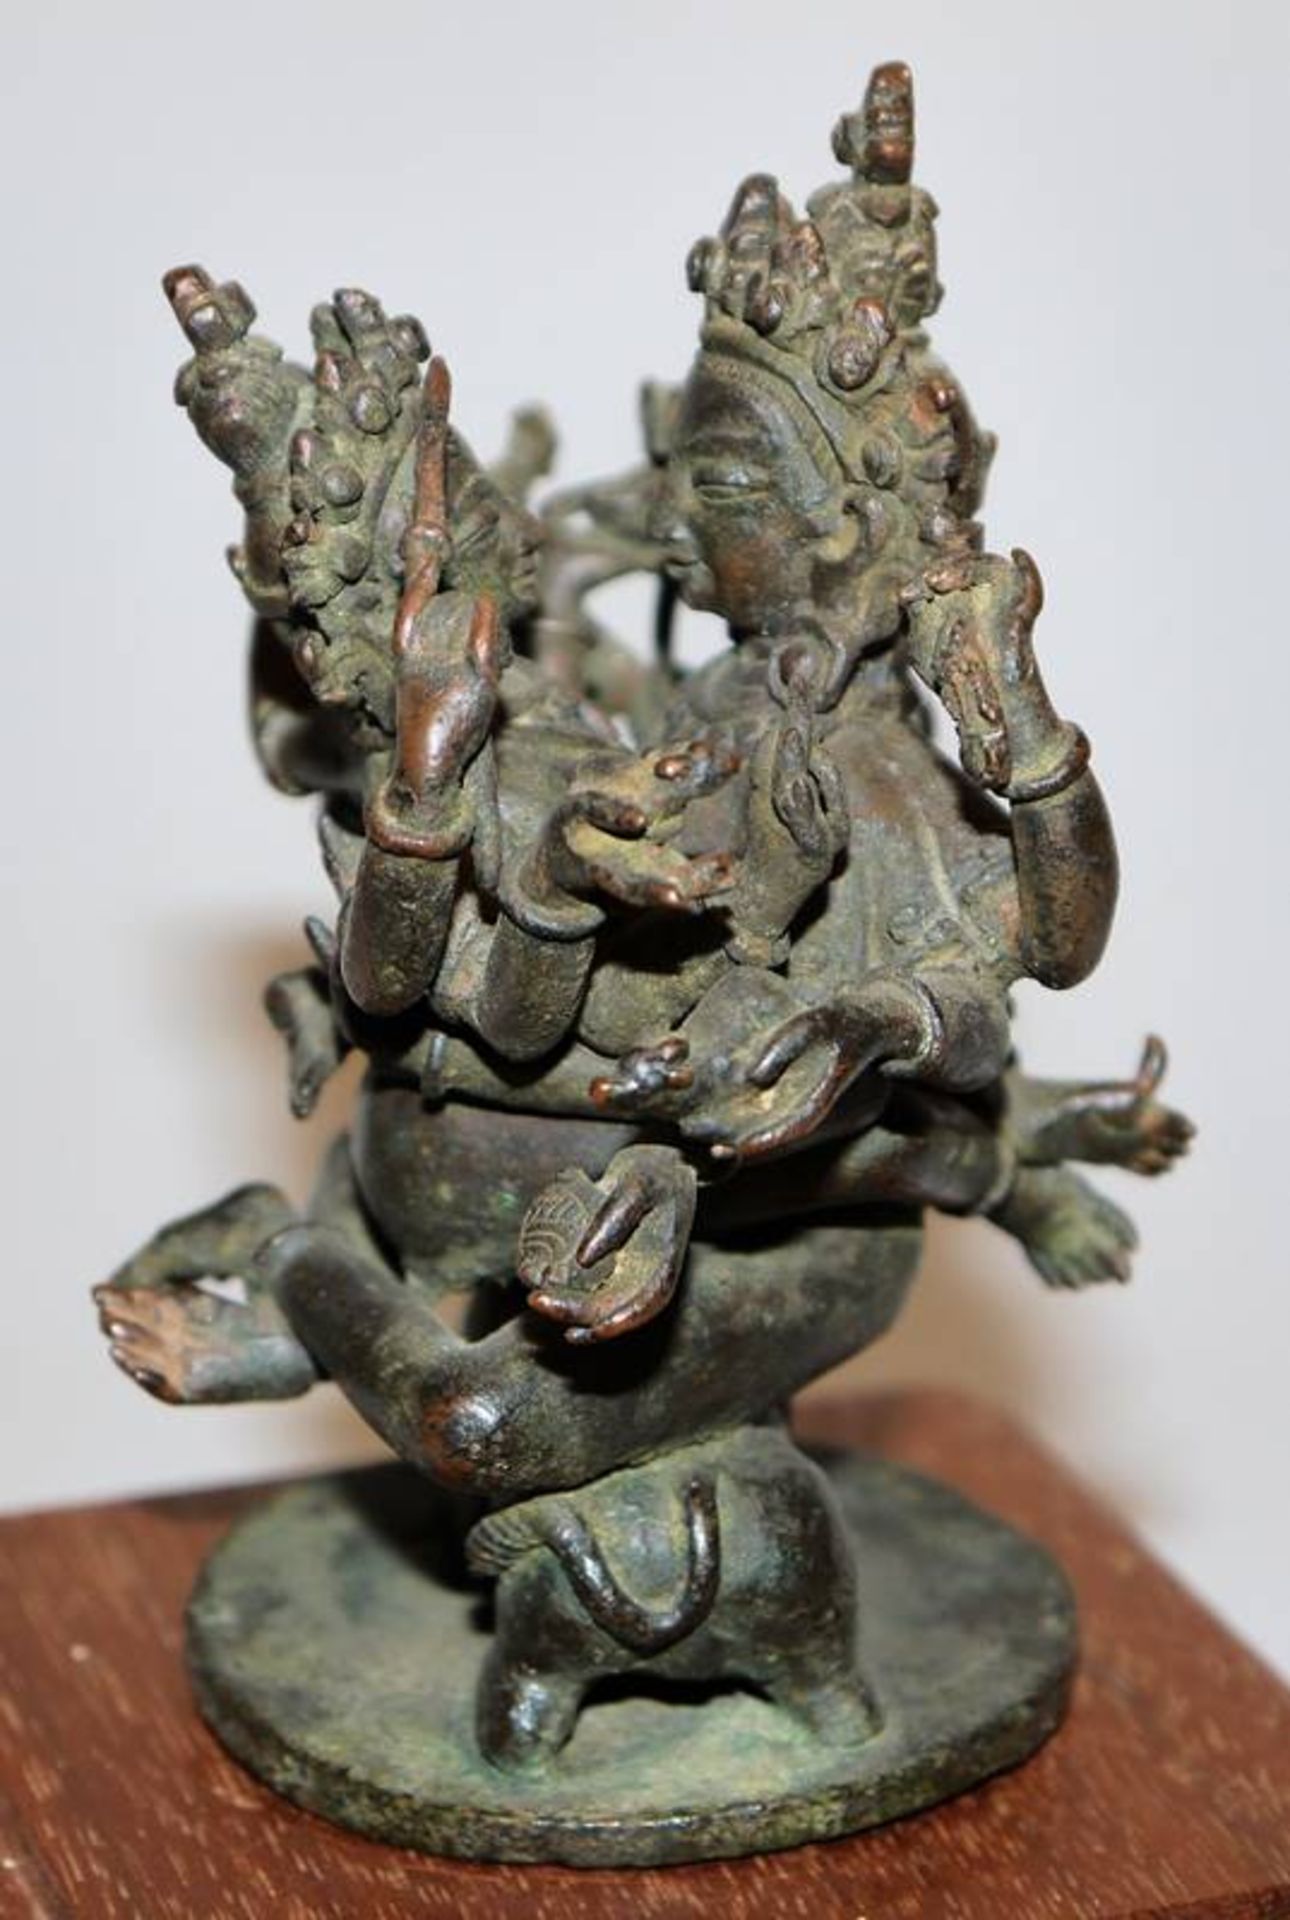 The god Shiva with consort in sexual union, bronze sculpture, Nepal 18th c. - Image 2 of 4